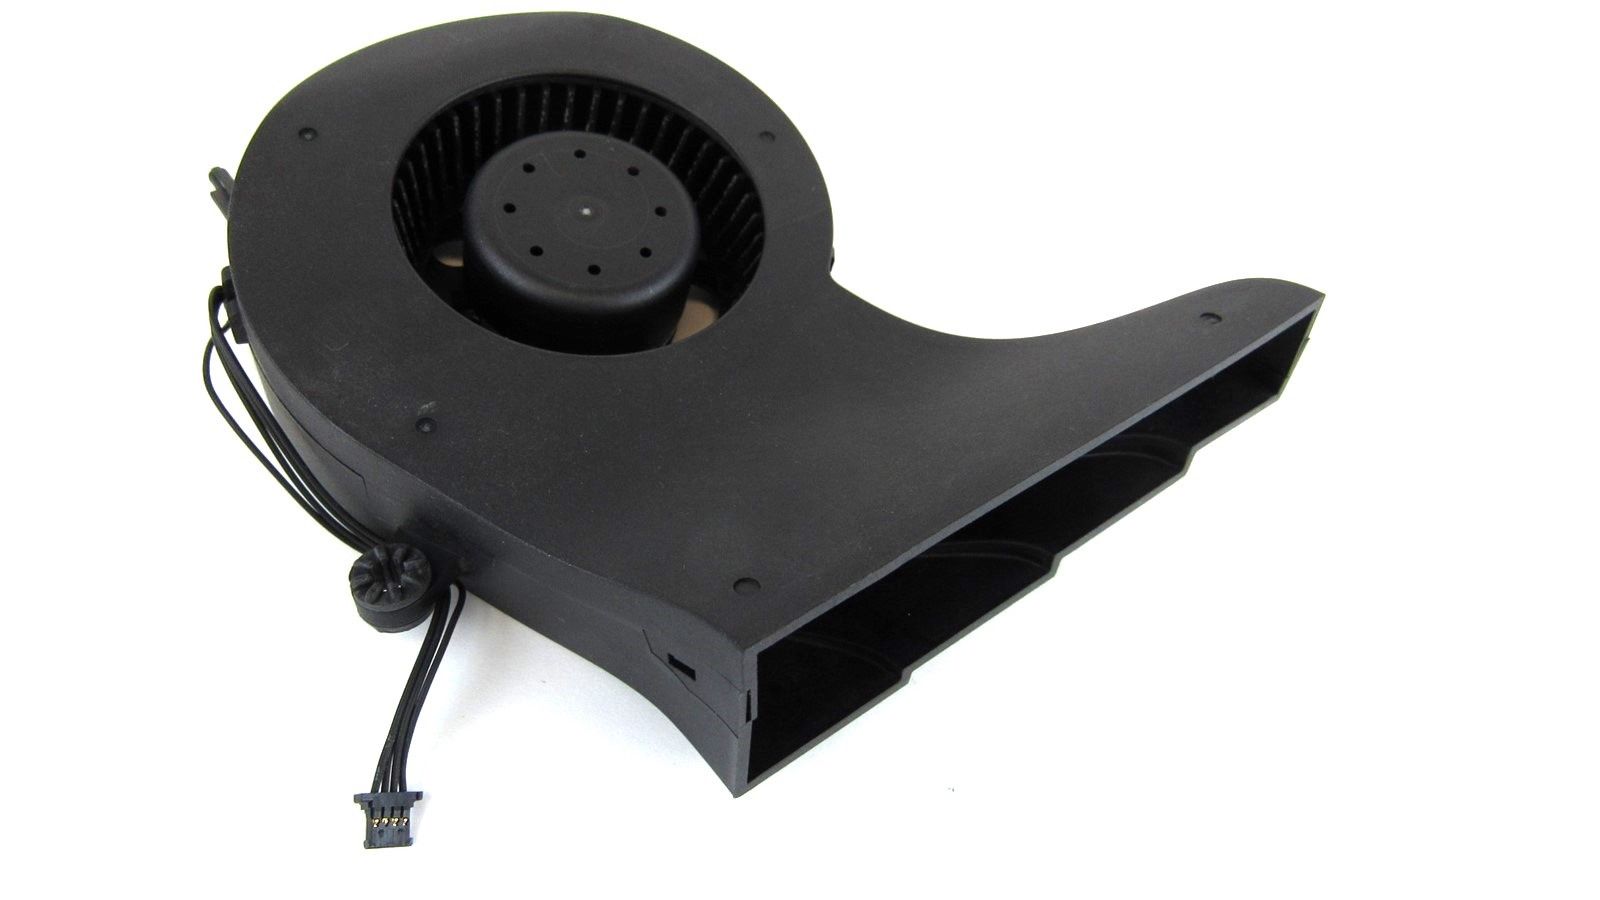 Apple iMac 21.5" A1311 Late 2009 Delta CPU Cooling Fan BFB0812H 610-0029